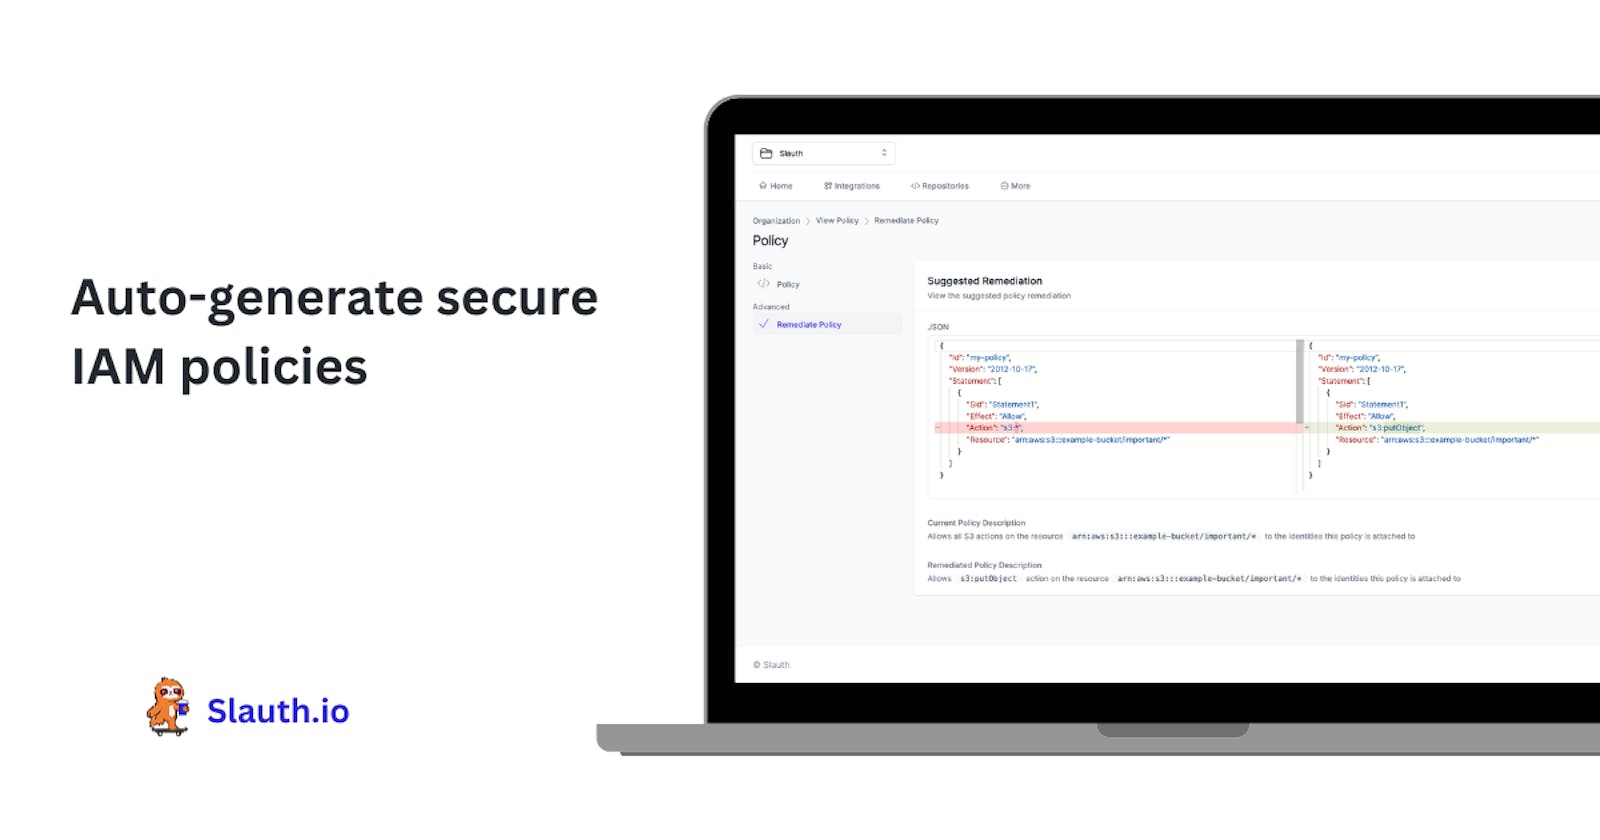 Auto-generate secure IAM policies for AWS and GCP by scanning your code repo